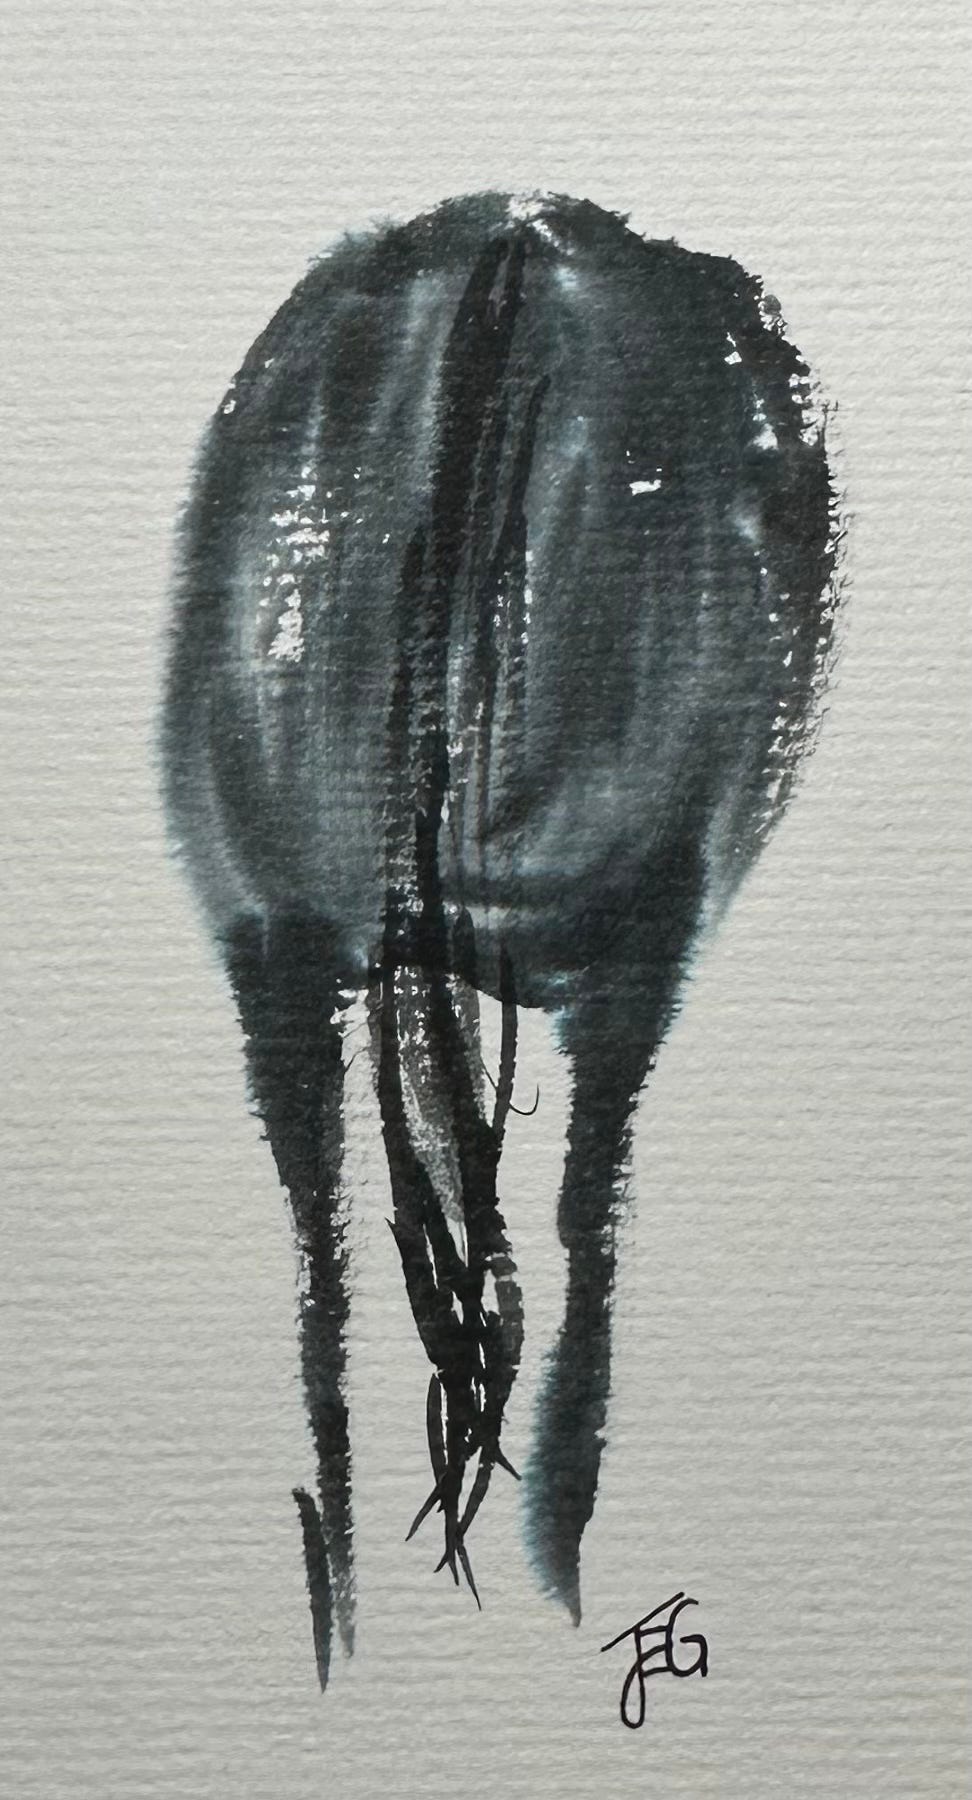 The back end of a black horse in watercolor.